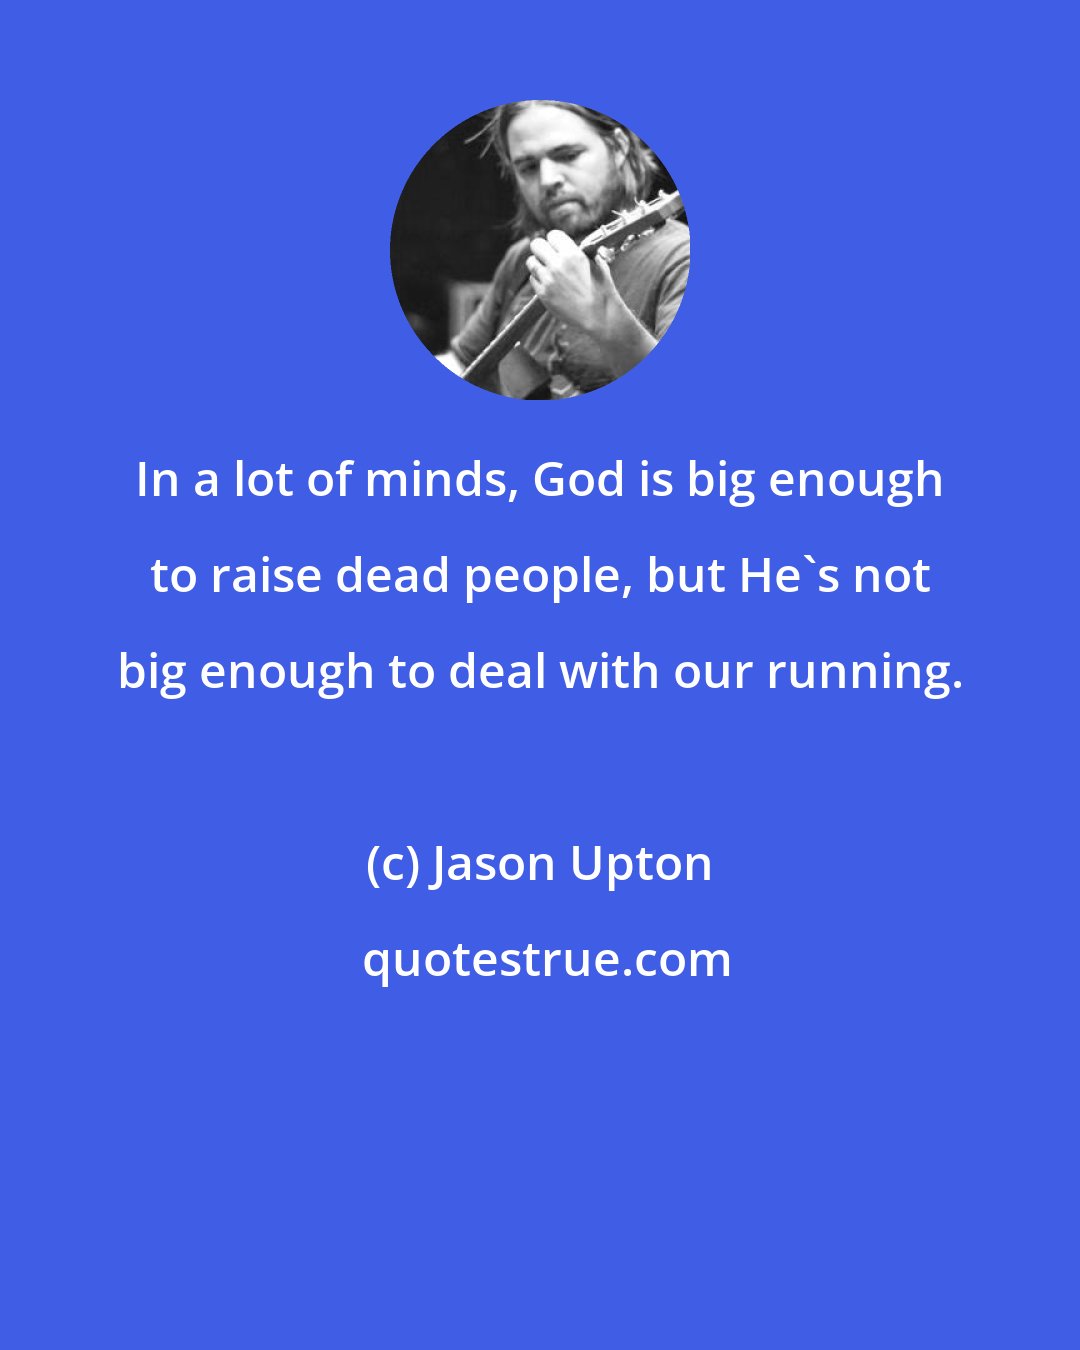 Jason Upton: In a lot of minds, God is big enough to raise dead people, but He's not big enough to deal with our running.